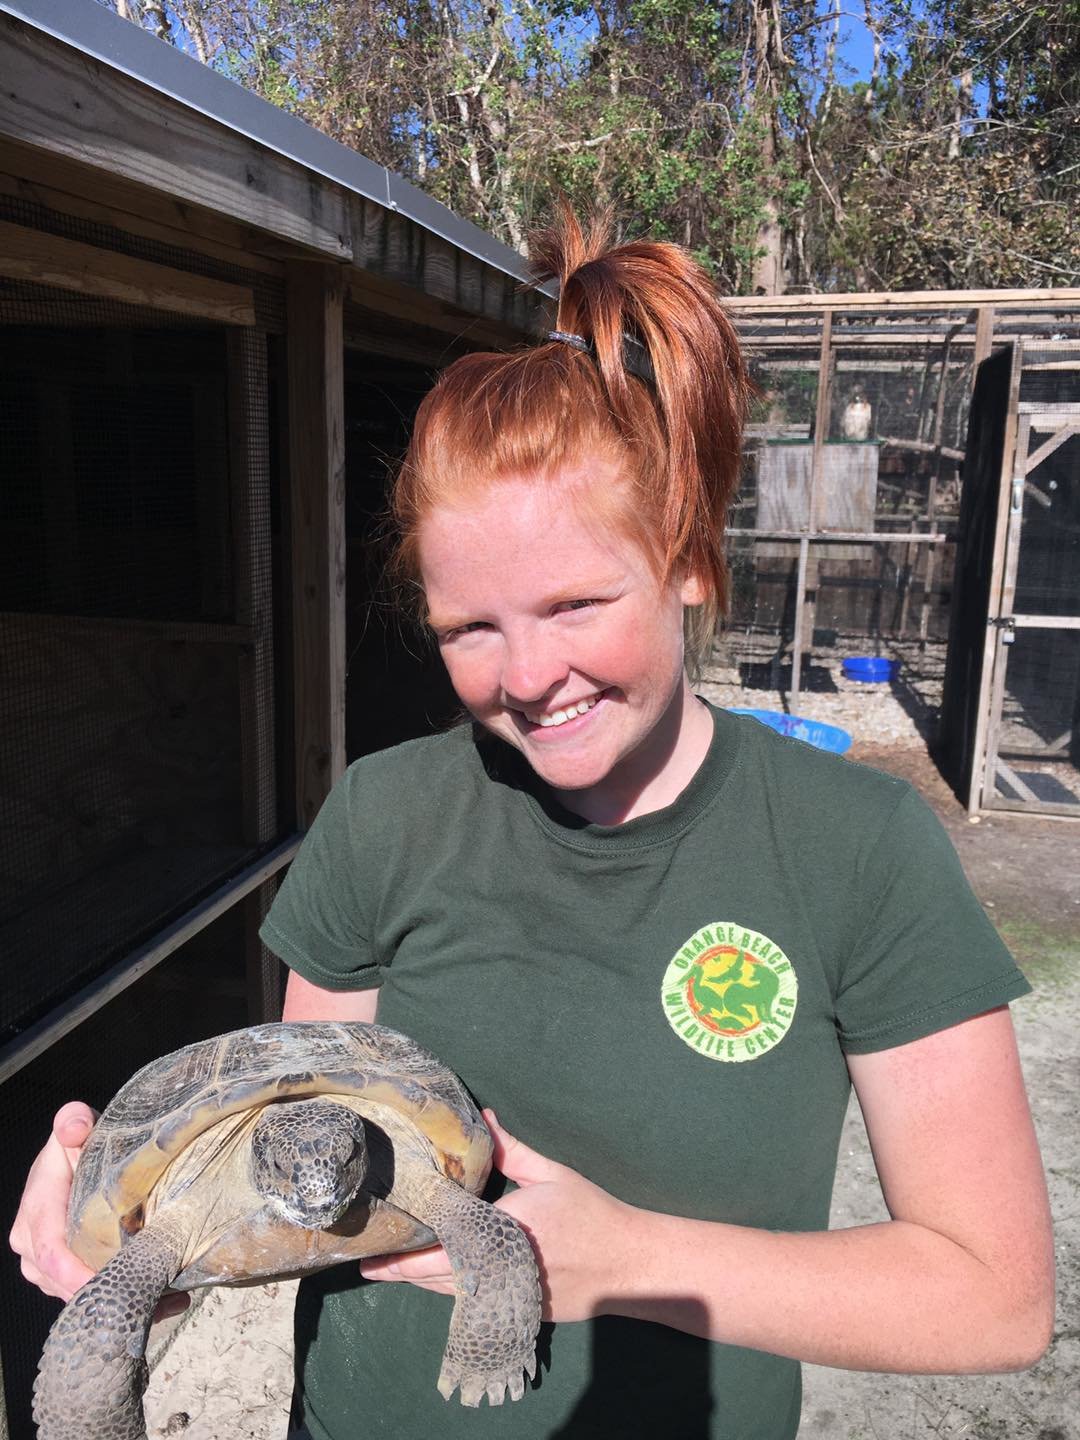 Abbie Dalton is one of the newer interns at the Orange Beach Wildlife Center. She is a Wisconsin native with a bachelor’s degree in zoology and environmental studies. She is working on a project that will help get new interns adjusted.